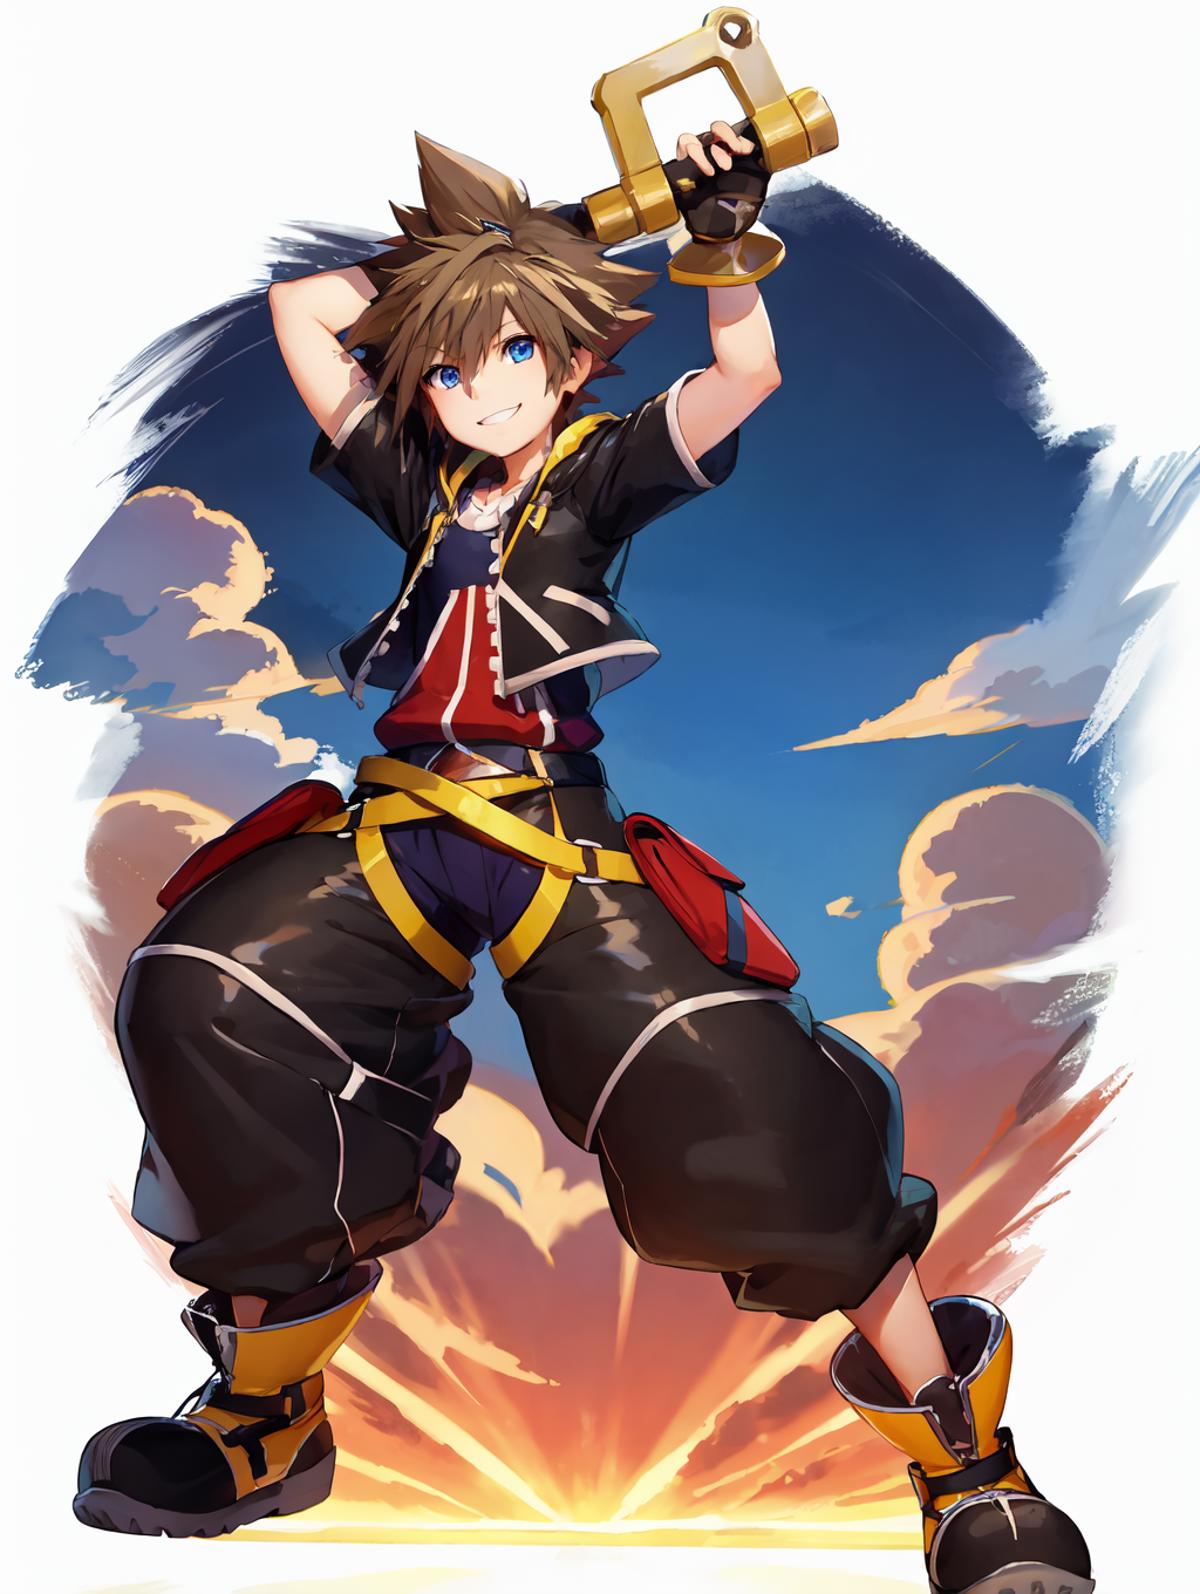 UnOfficial Sora (ソラ) KHII Default Outfit - Kingdom Hearts (キングダムハーツ) image by Sizey